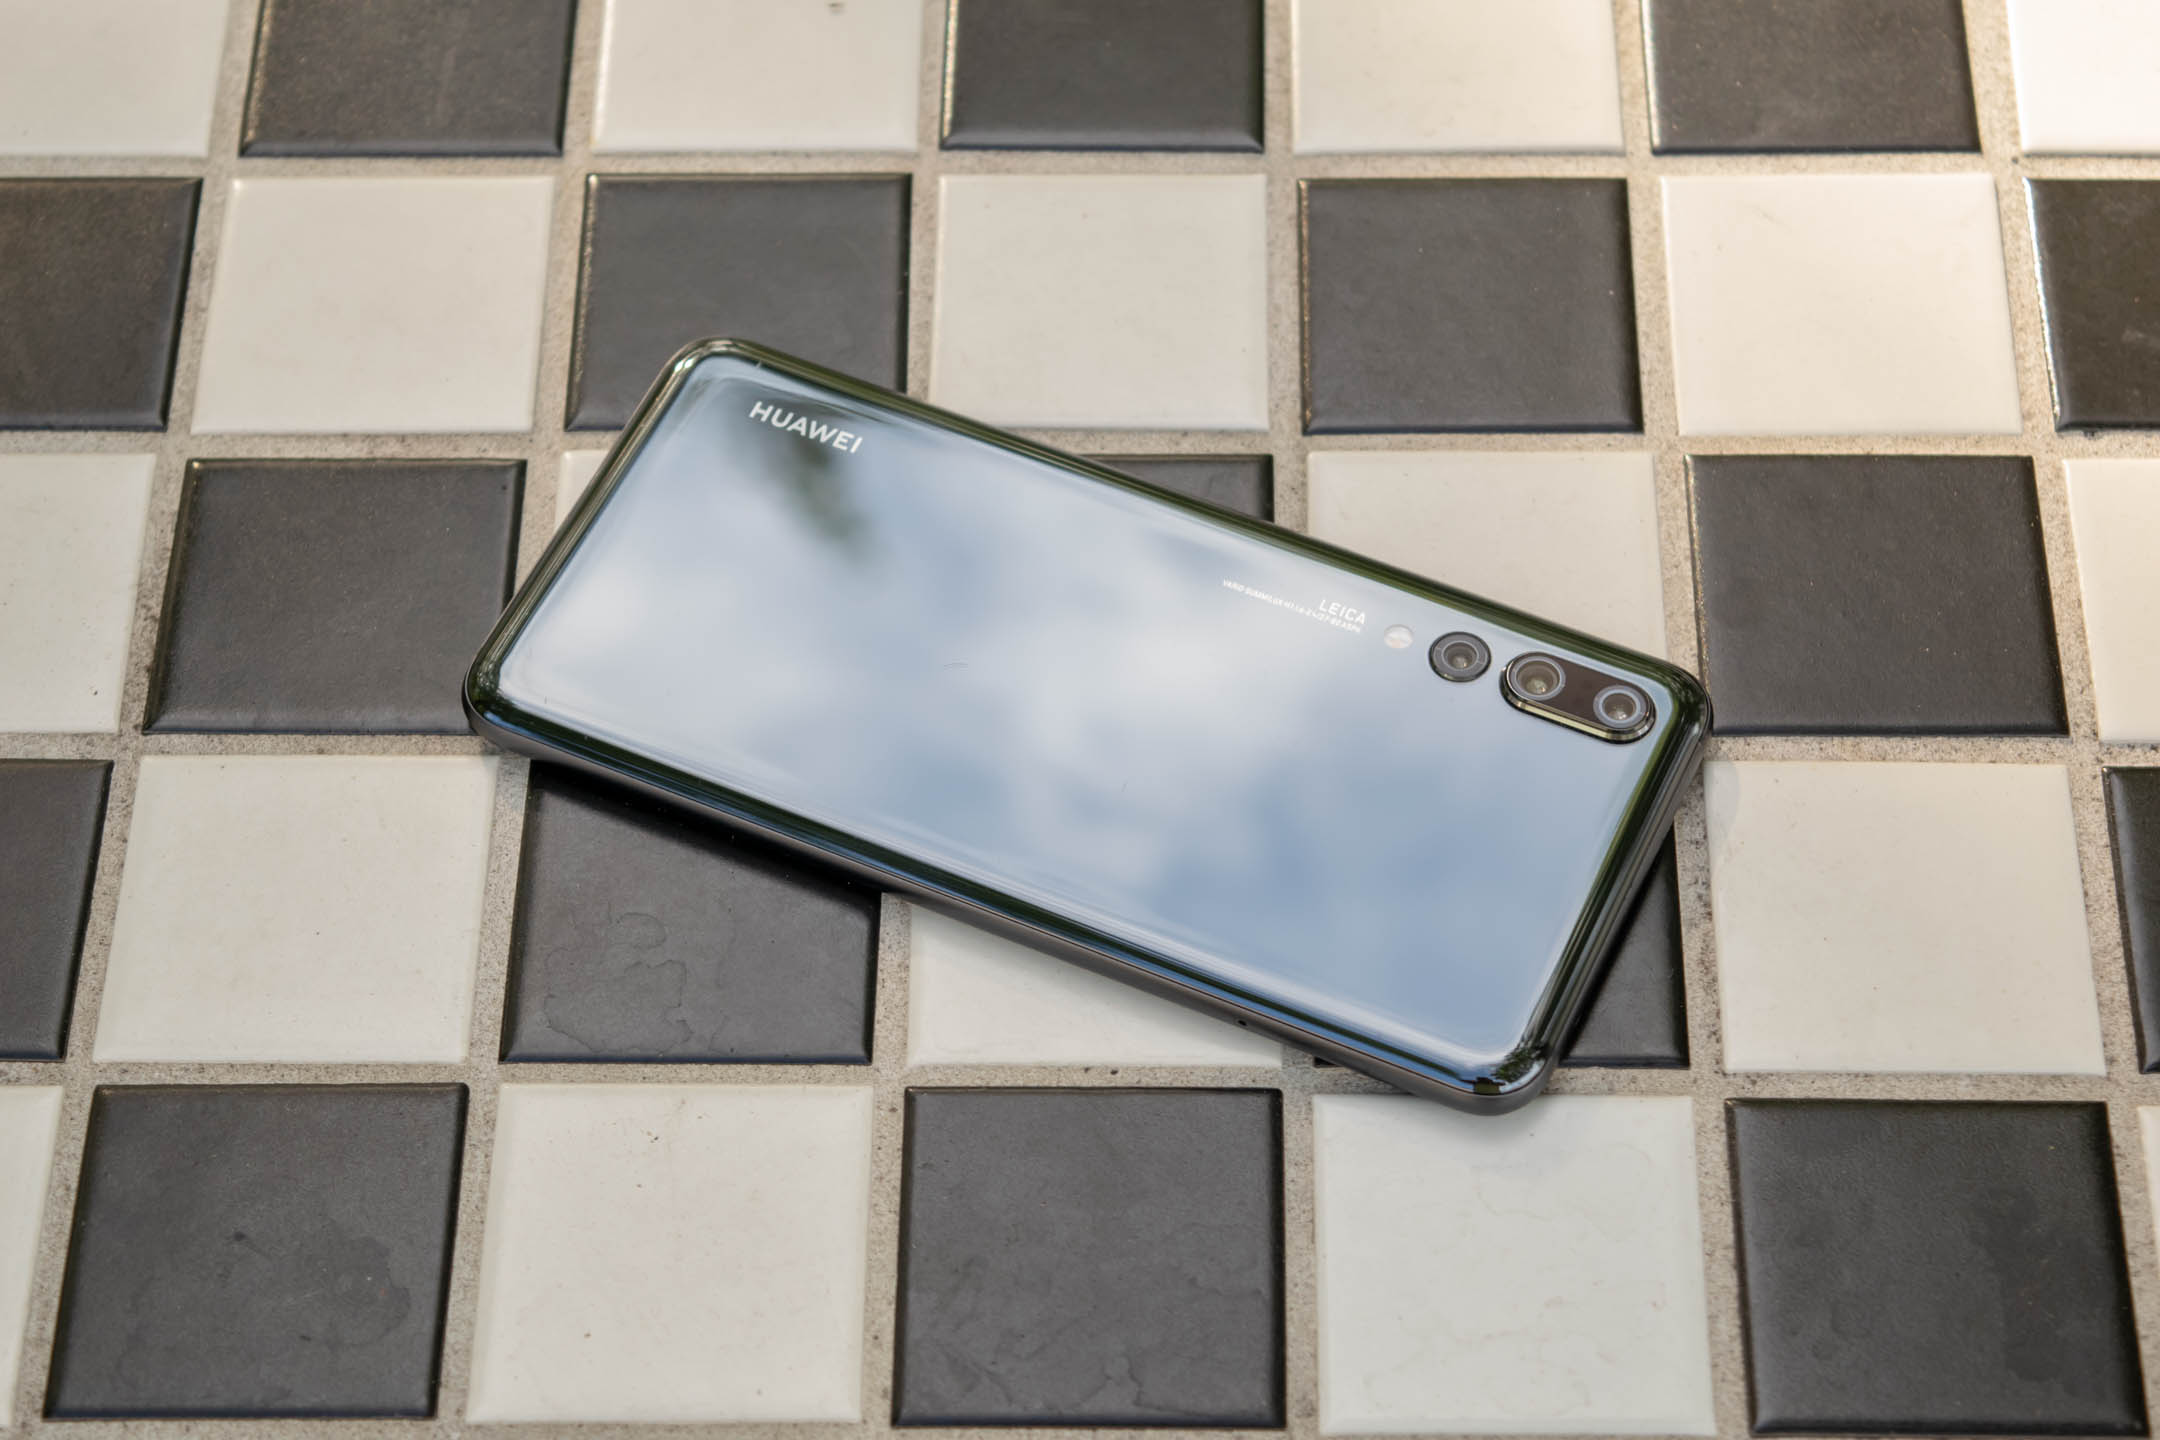 Huawei P20 Pro EMUI 8.1 Android News Martin Ottawa Canada review